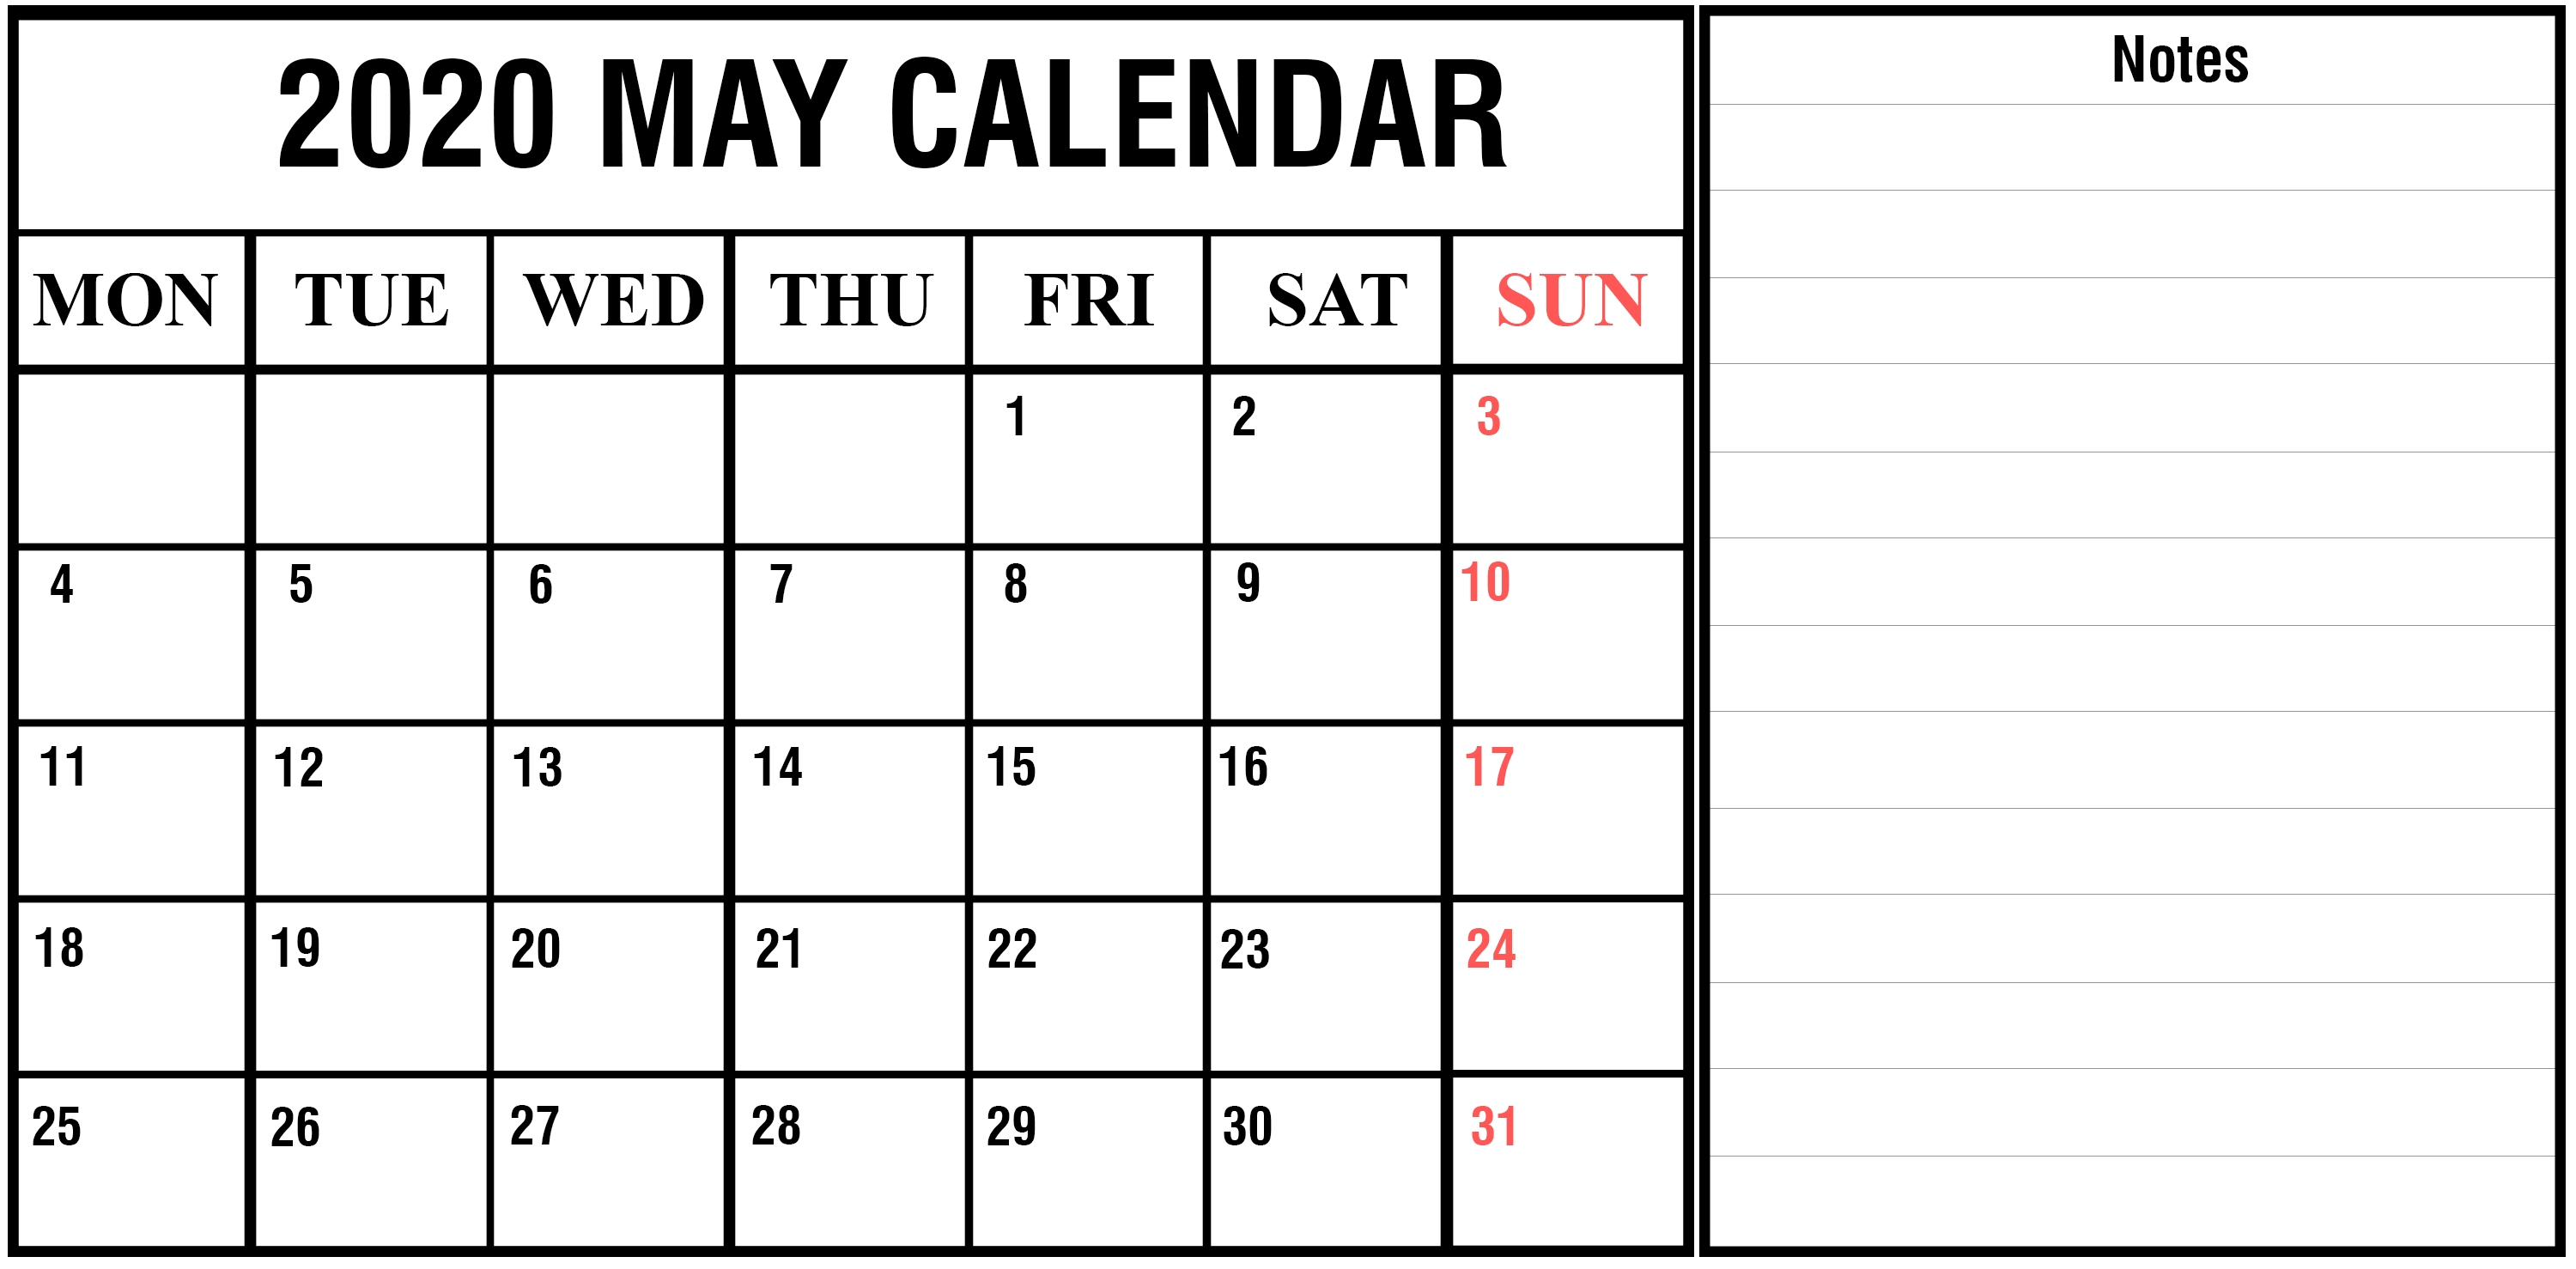 May 2020 Calendar With Notes #May #2020 #May2020 Calendar Template With Notes